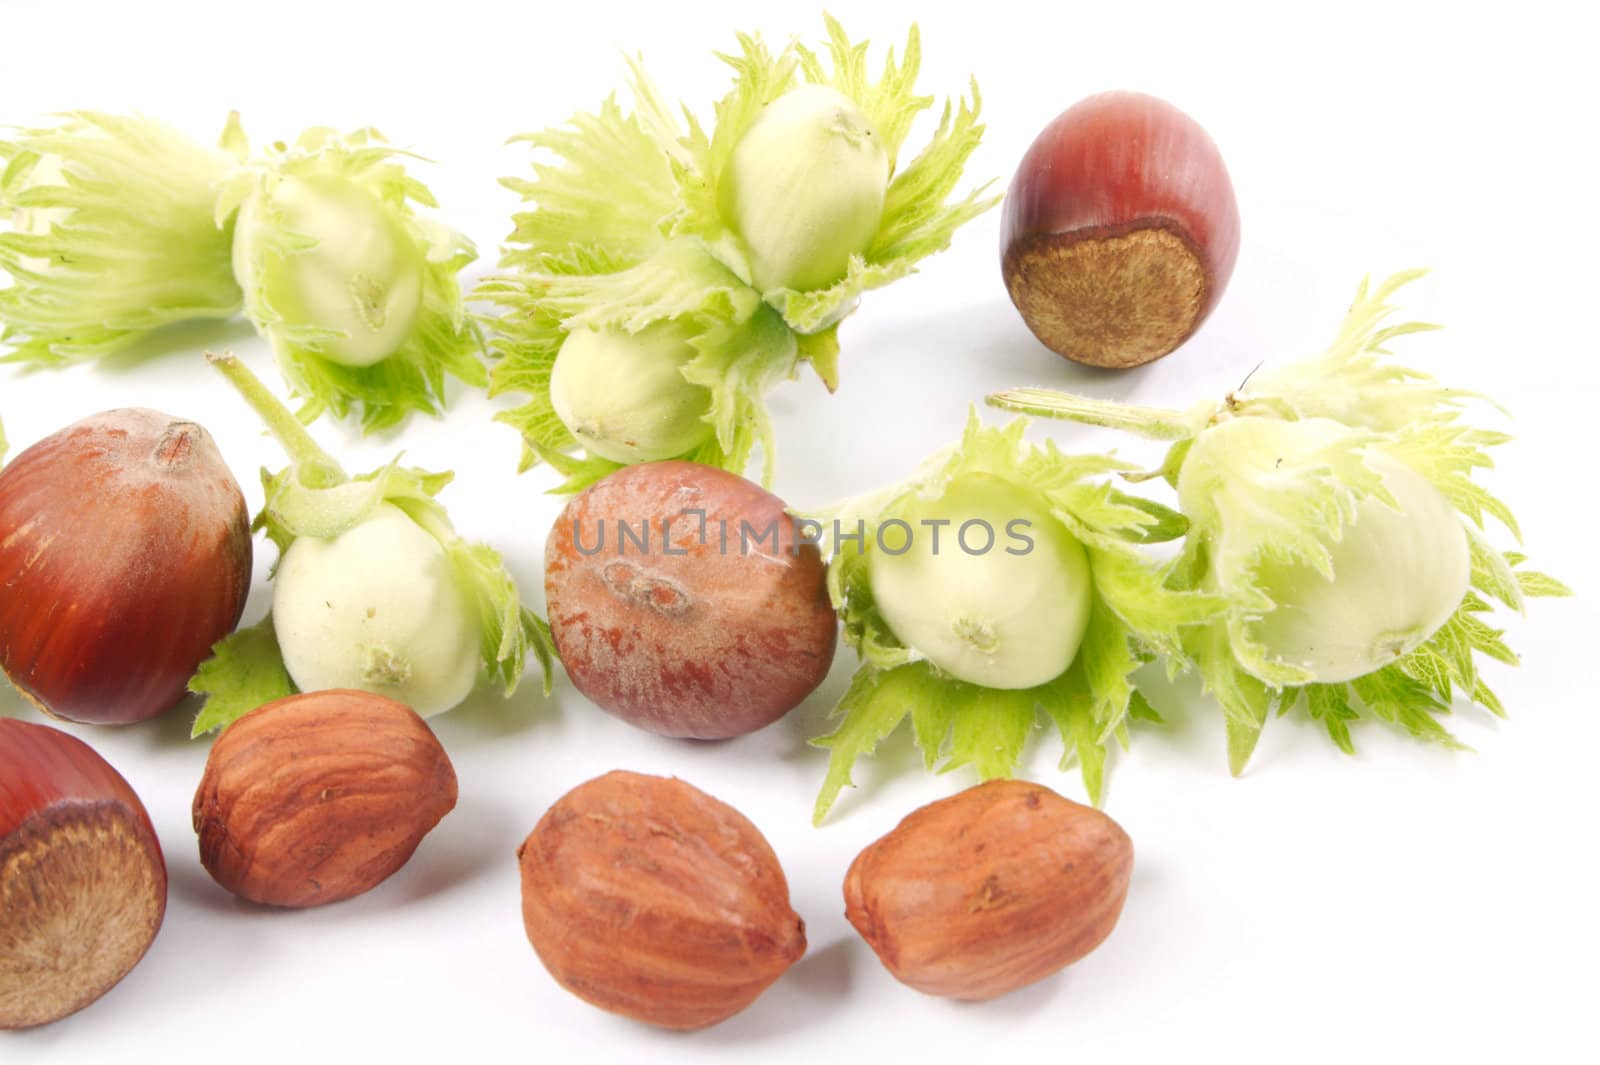 Group of fruits of a nut tree on a white background.